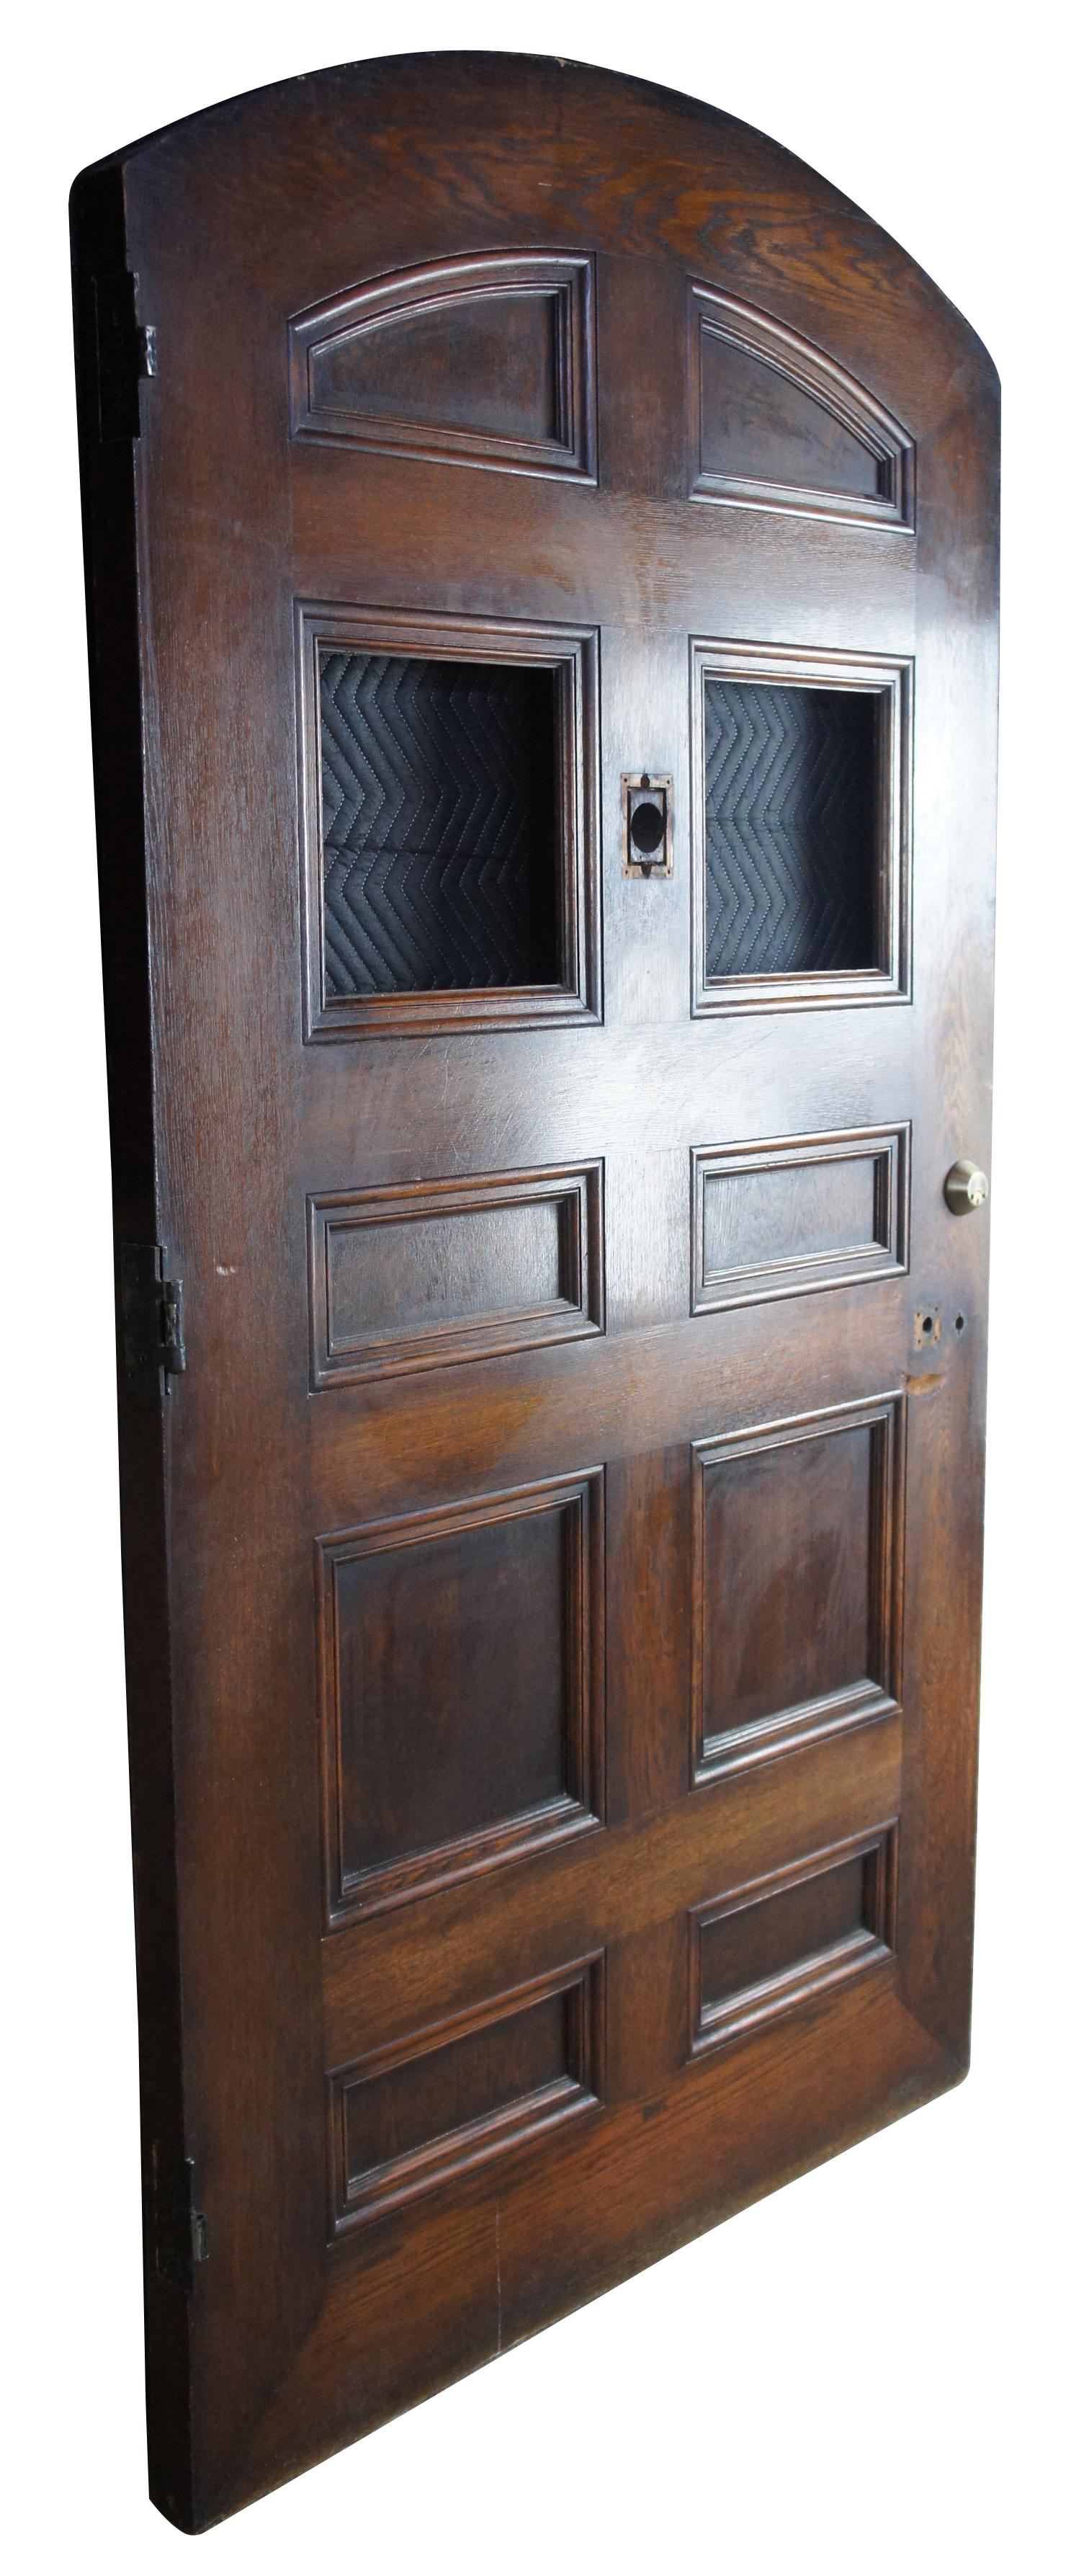 This massive arched solid oak door comes from one of the first homes built in oakwood, Ohio by Harry I Schenck. It is the original front door, circa early 1900s. Features eight panels and two square inserts for leaded, stained or art glass. A nice